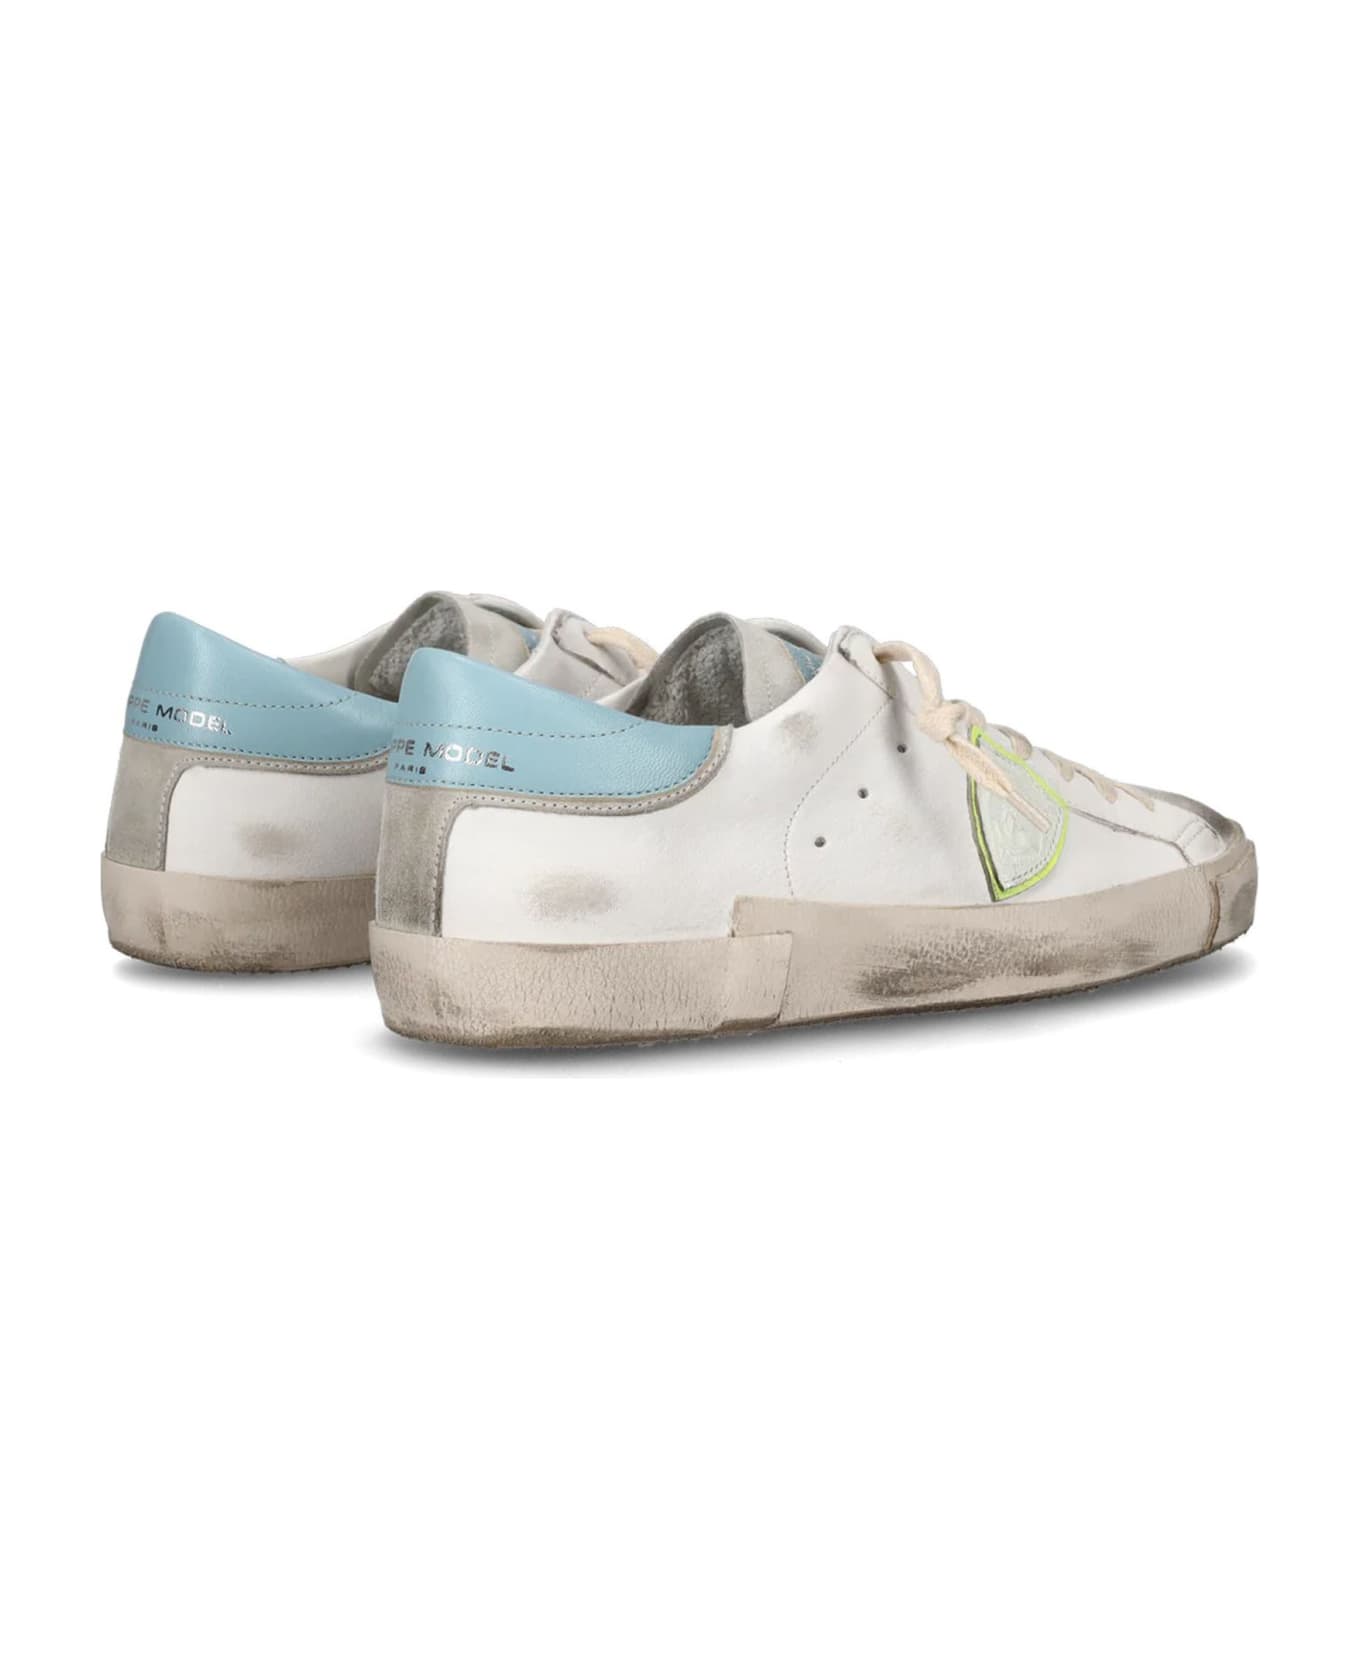 Philippe Model Prsx Sneaker White, Grey And Light Blue - Gris Azul